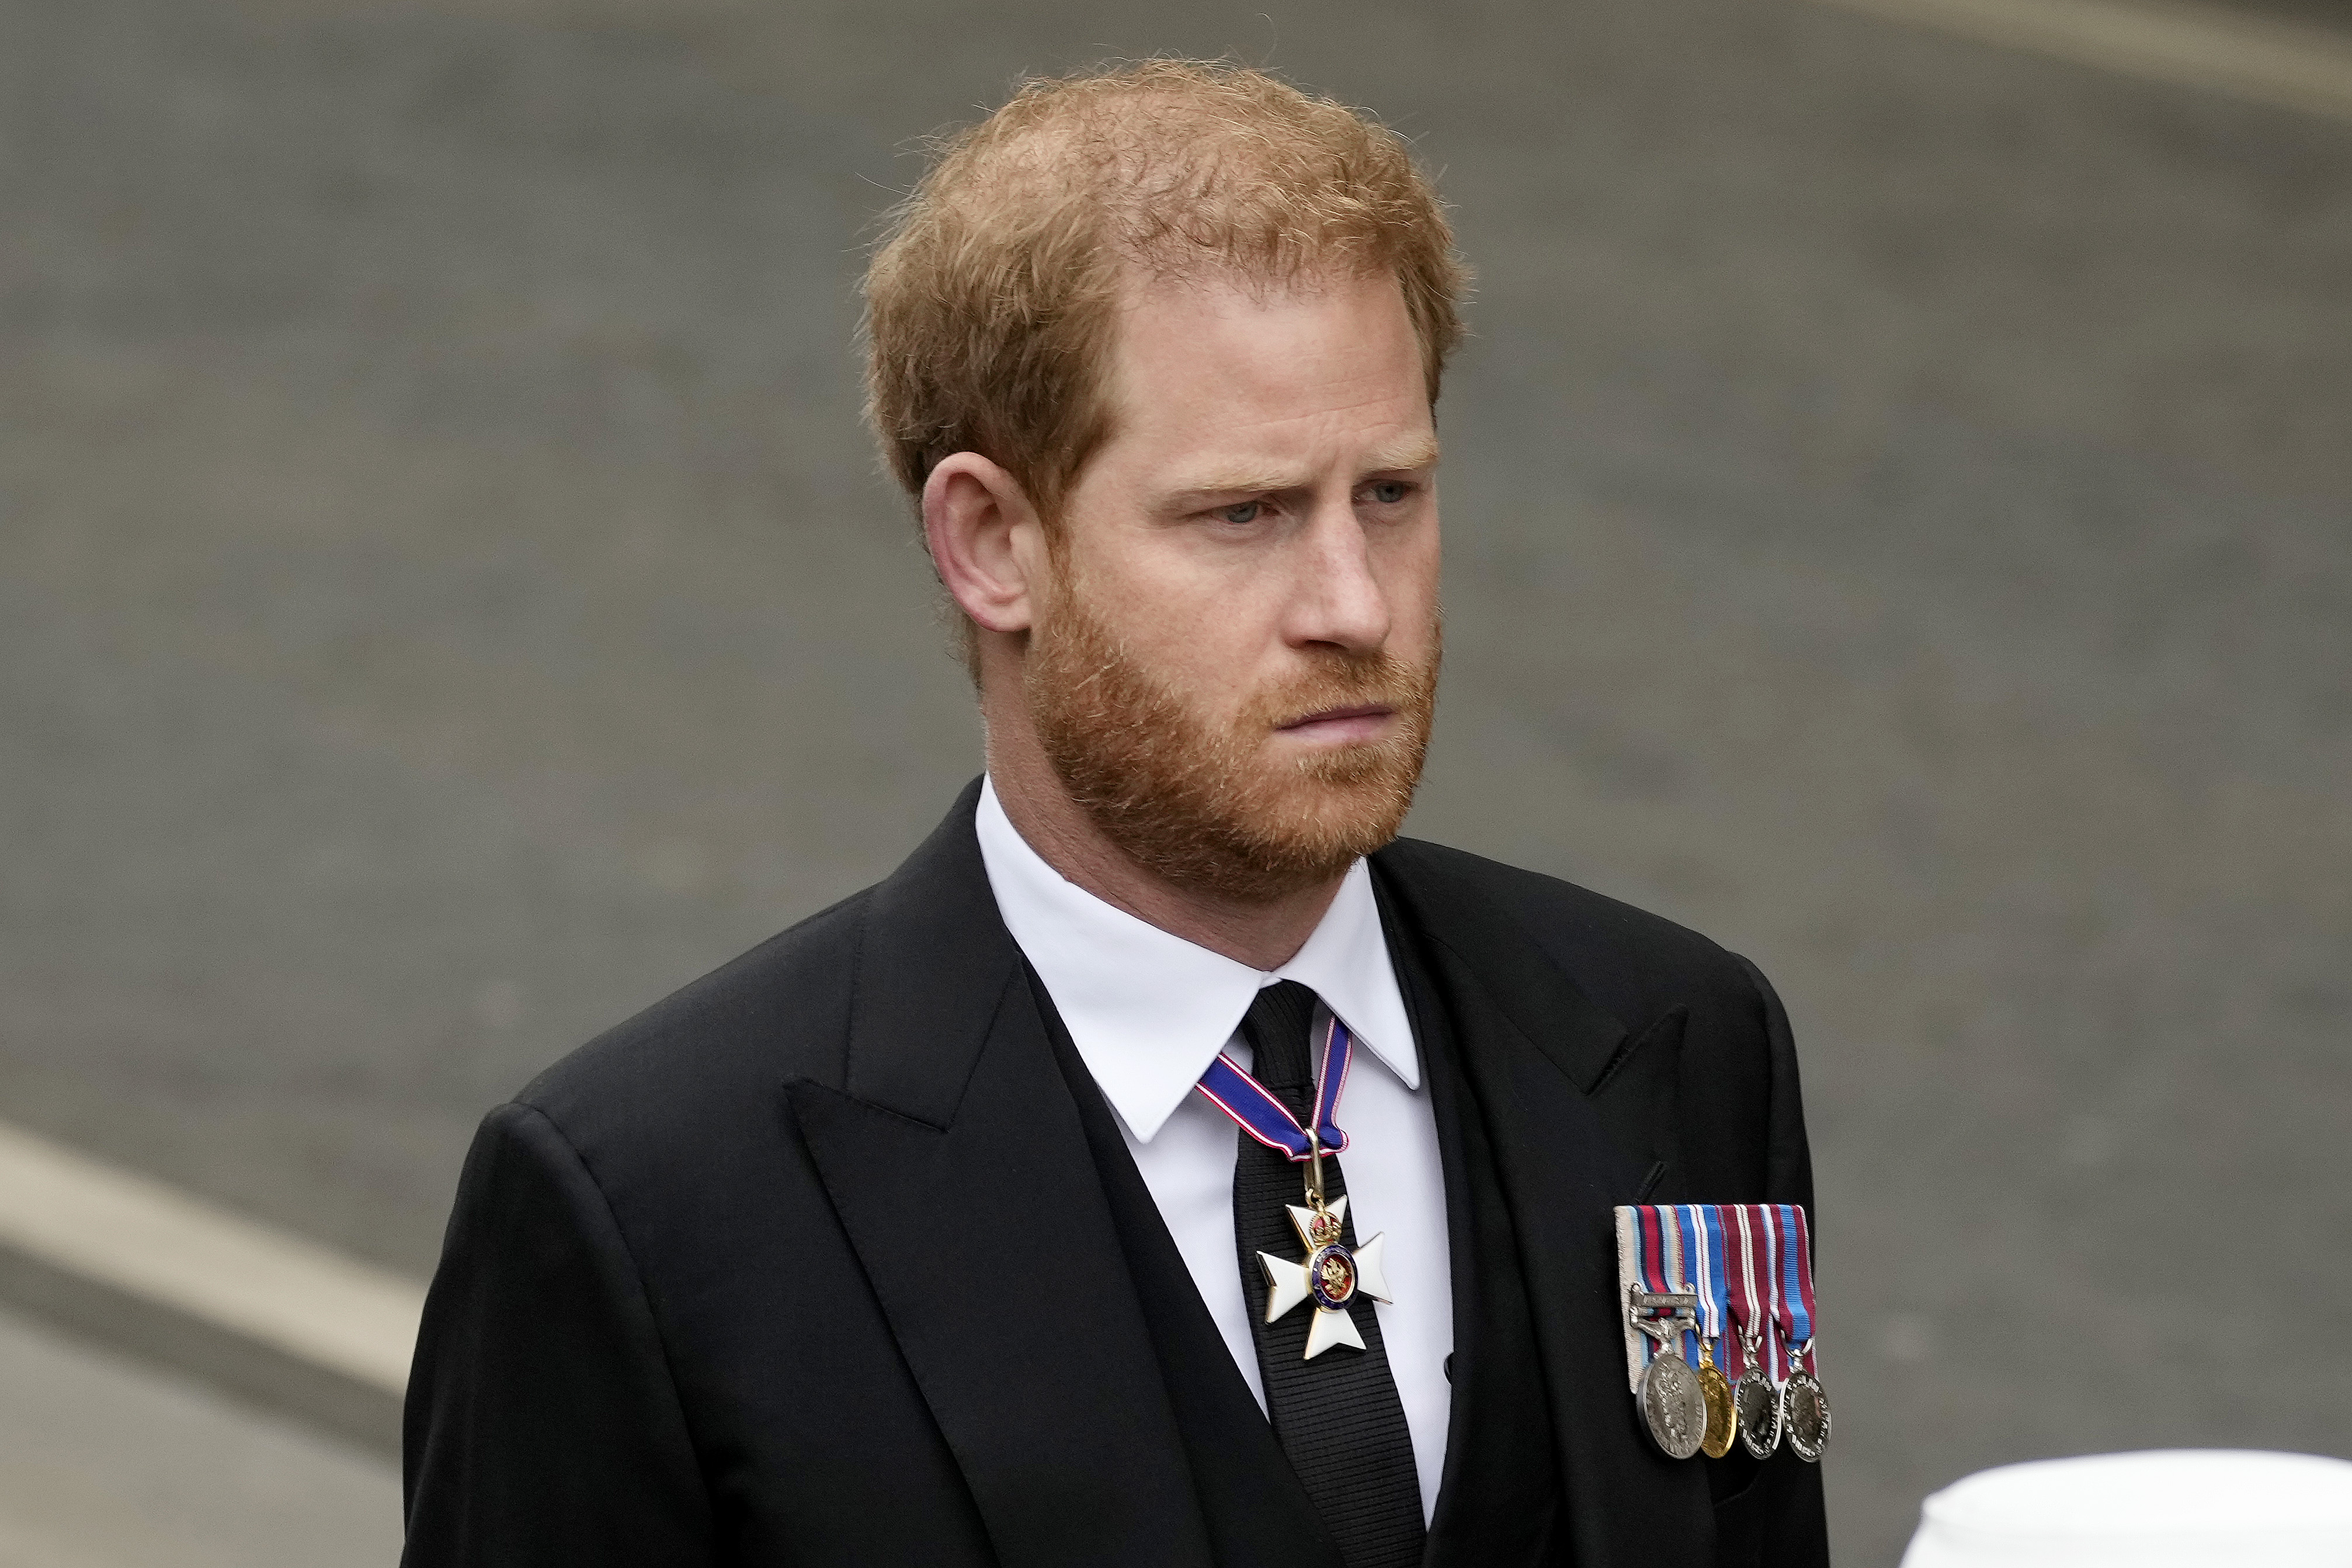 Prince Harry arrives at Westminster Abbey on September 19, 2022 in London, England. | Source: Getty Images